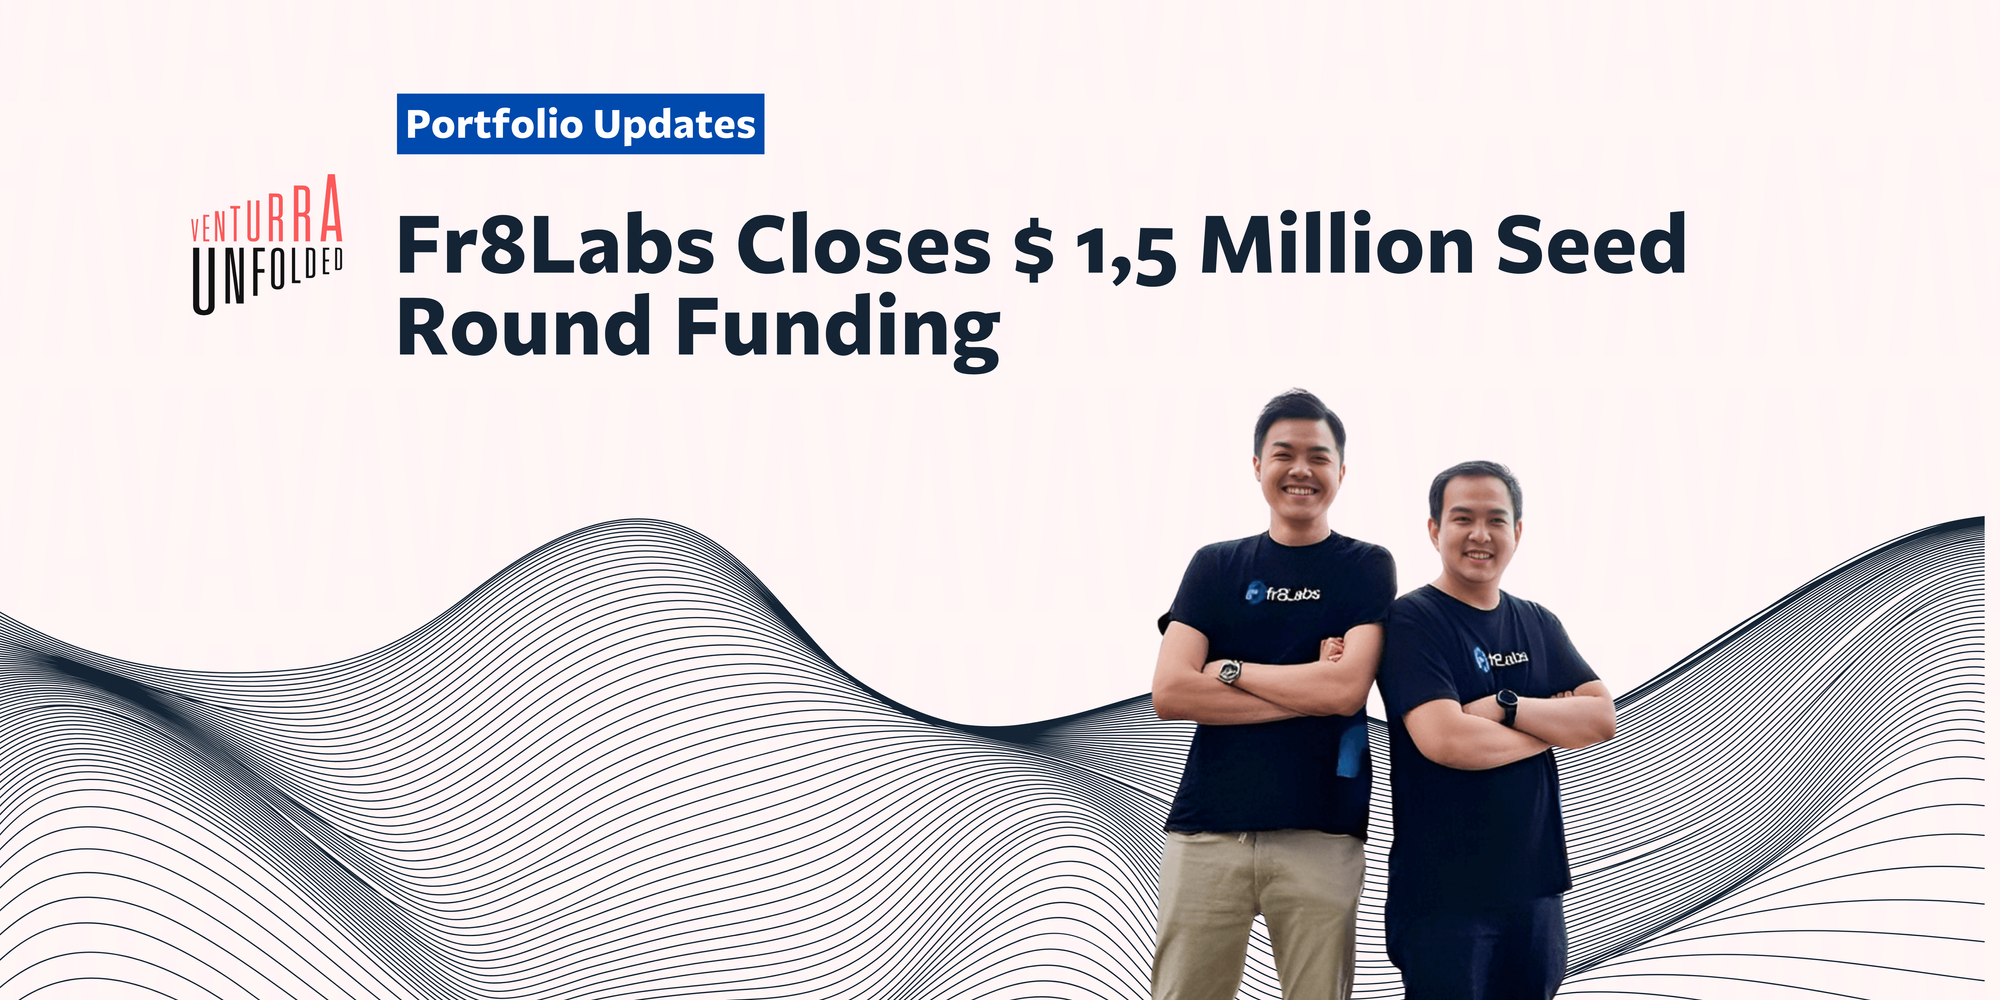 Fr8Labs Closes $ 1,5 Million Seed Round Funding